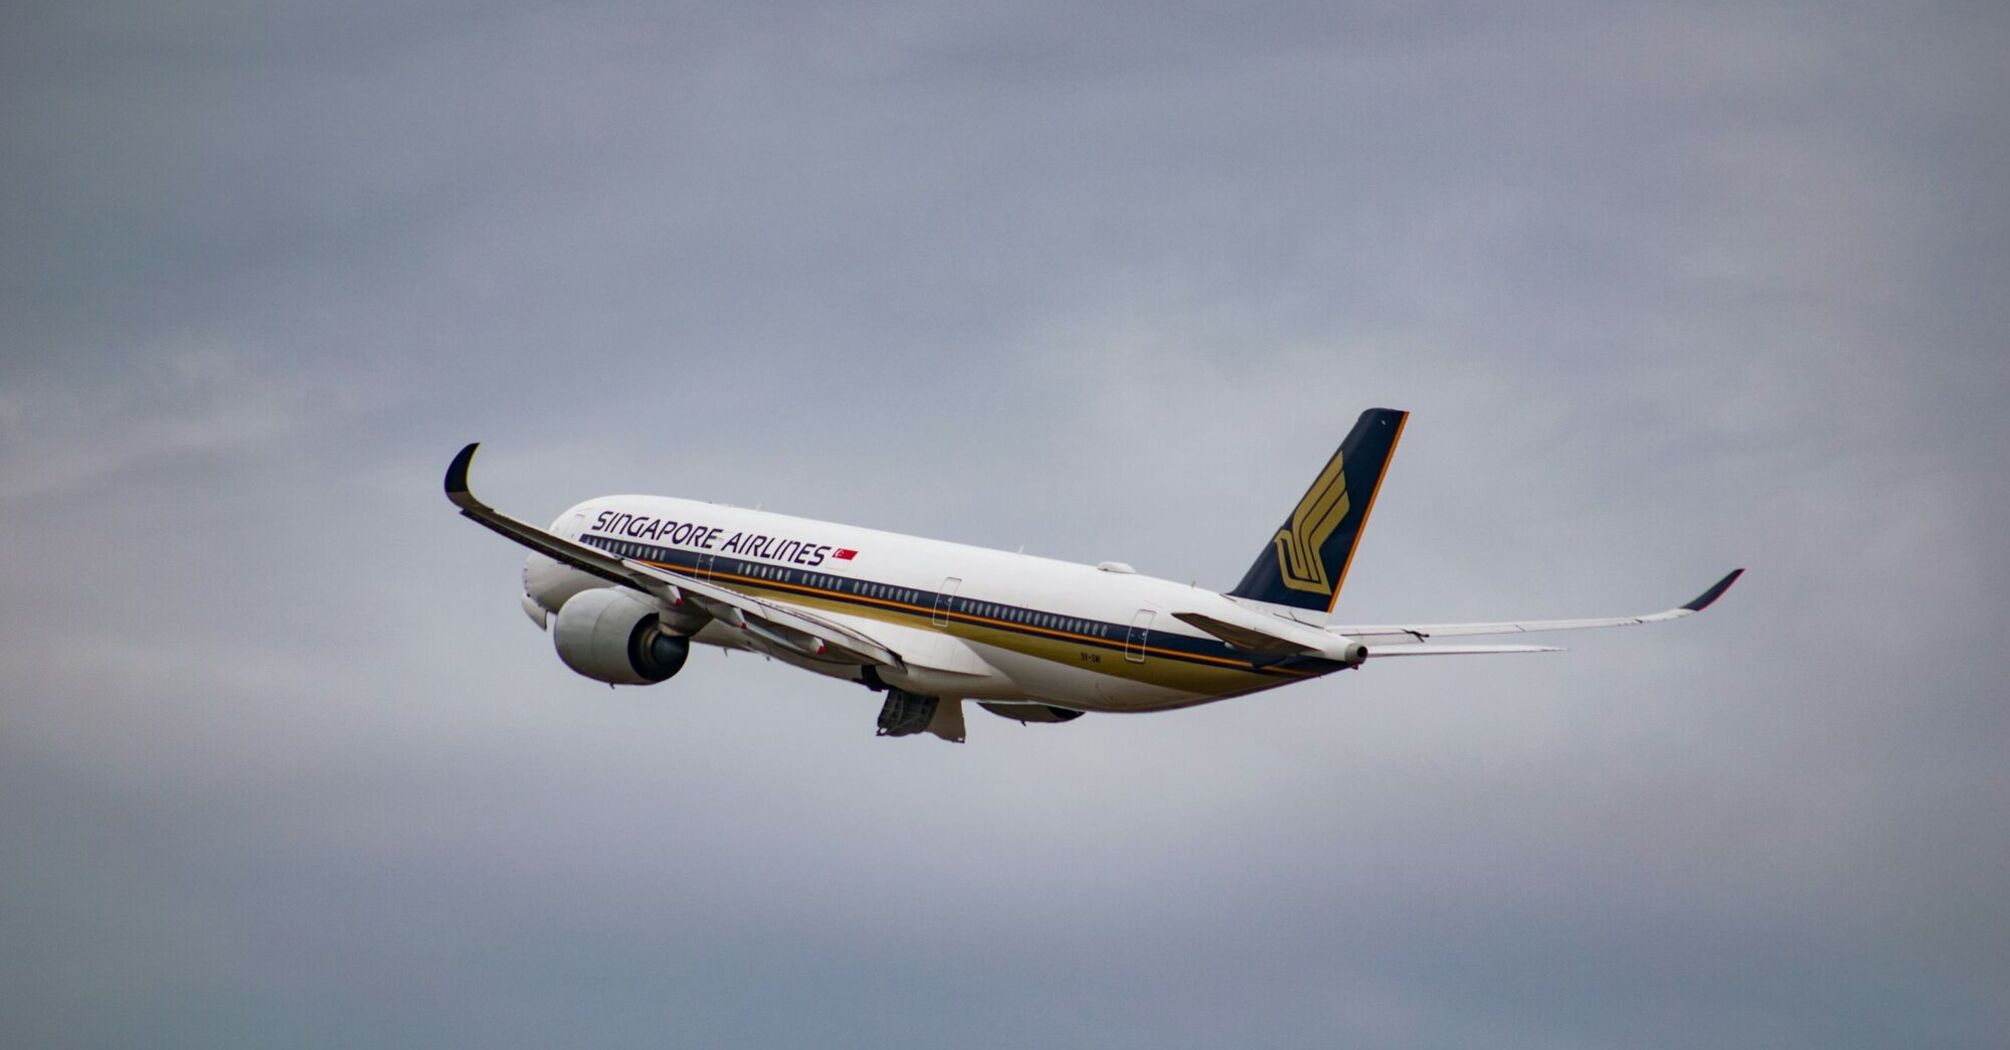 Singapore Airlines airplane in flight